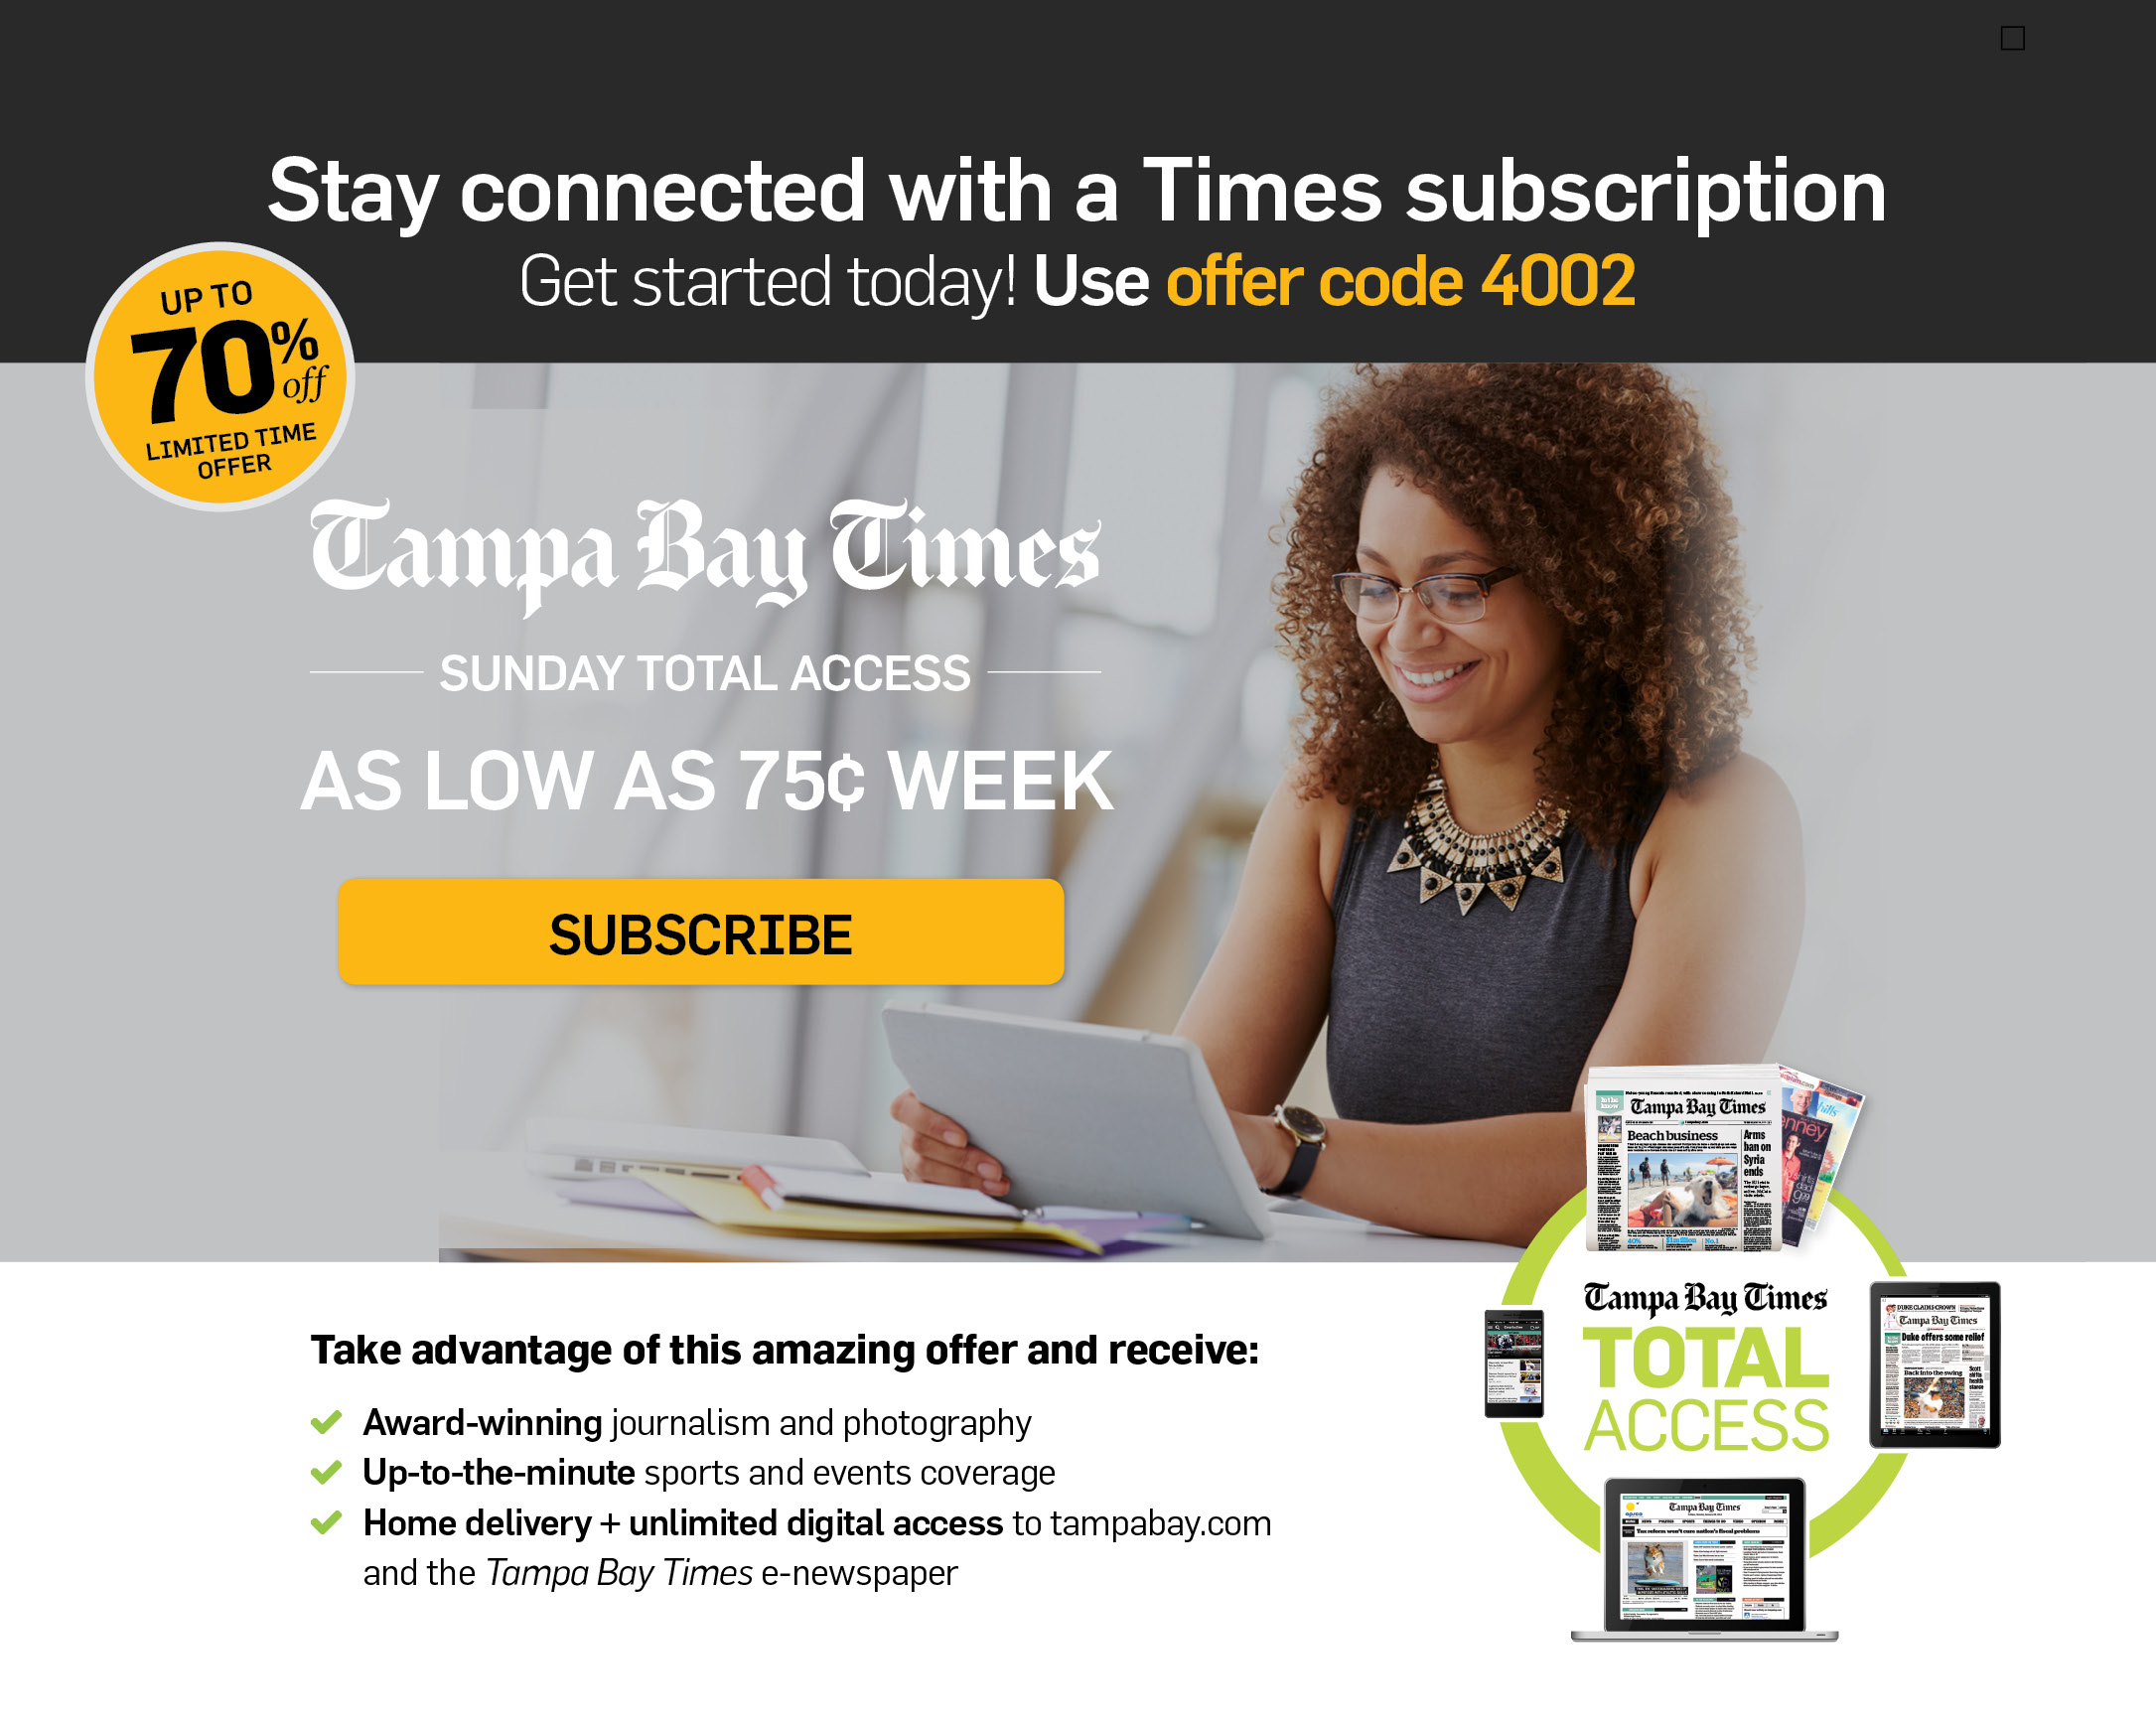 Stay connected with a Times subscription - Get started today! Use offer code 4002 | Tampa Bay Times Sunday TOTAL ACCESS | Just a $1 a week | Take advantage of this amazing offer and receive:
• Award-winning journalism and photography
• Up-to-the-minute sports and events coverage
• Home delivery + unlimited digital access to tampabay.com and the Tampa Bay Times e-newspaper

Get started today! Use offer code 4002